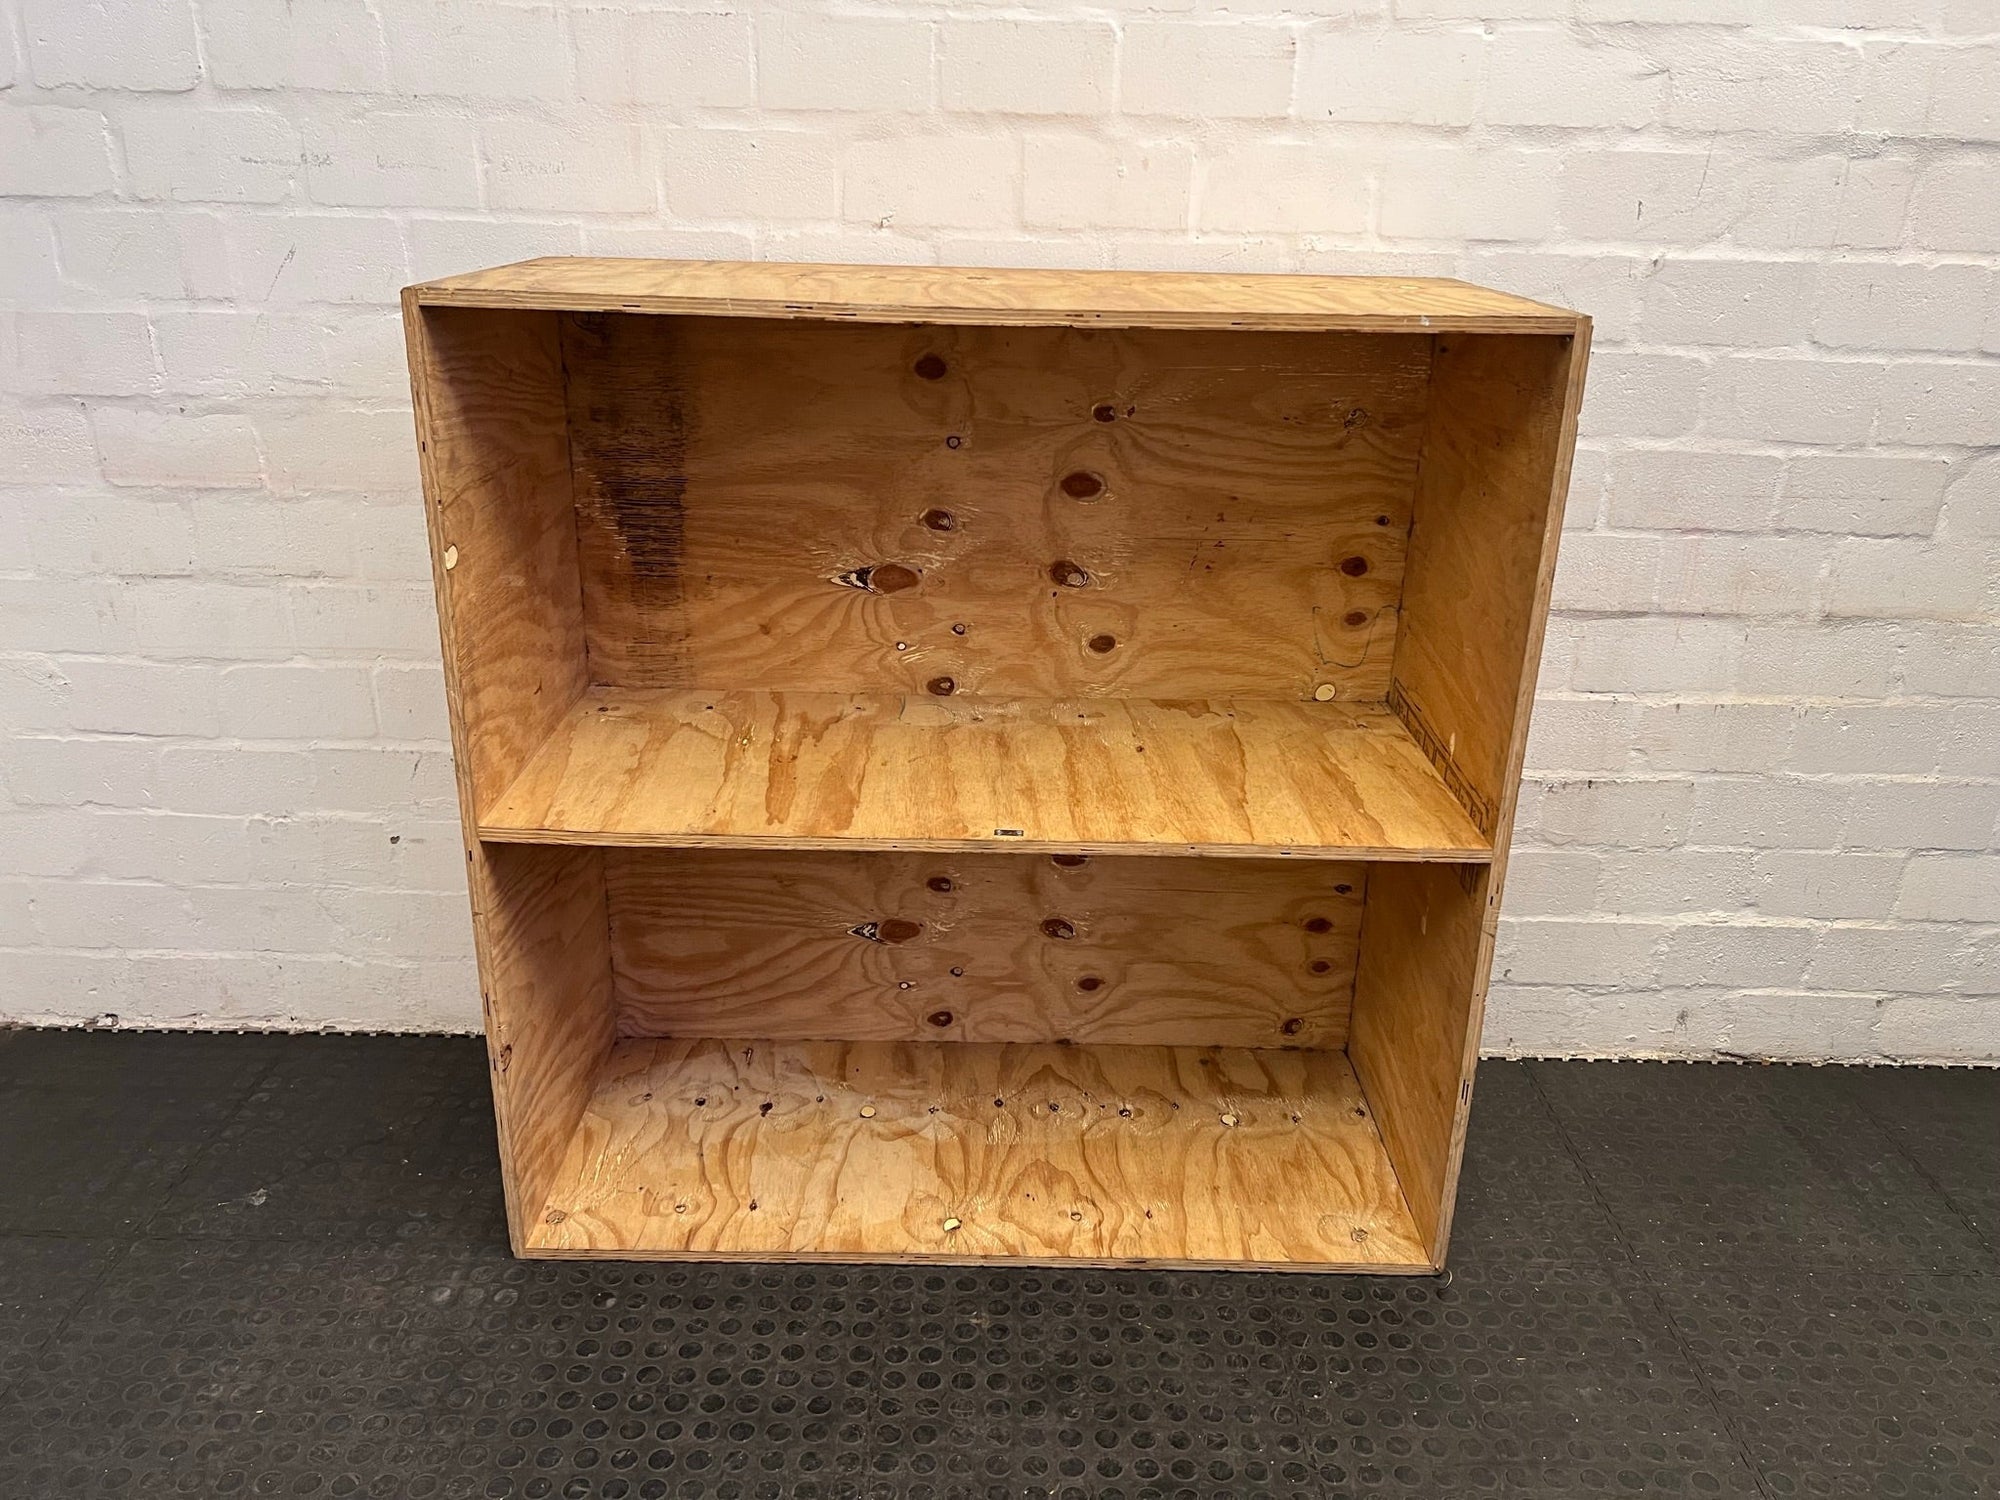 2 Tier Wooden Bookshelf (Some Chipping) - REDUCED